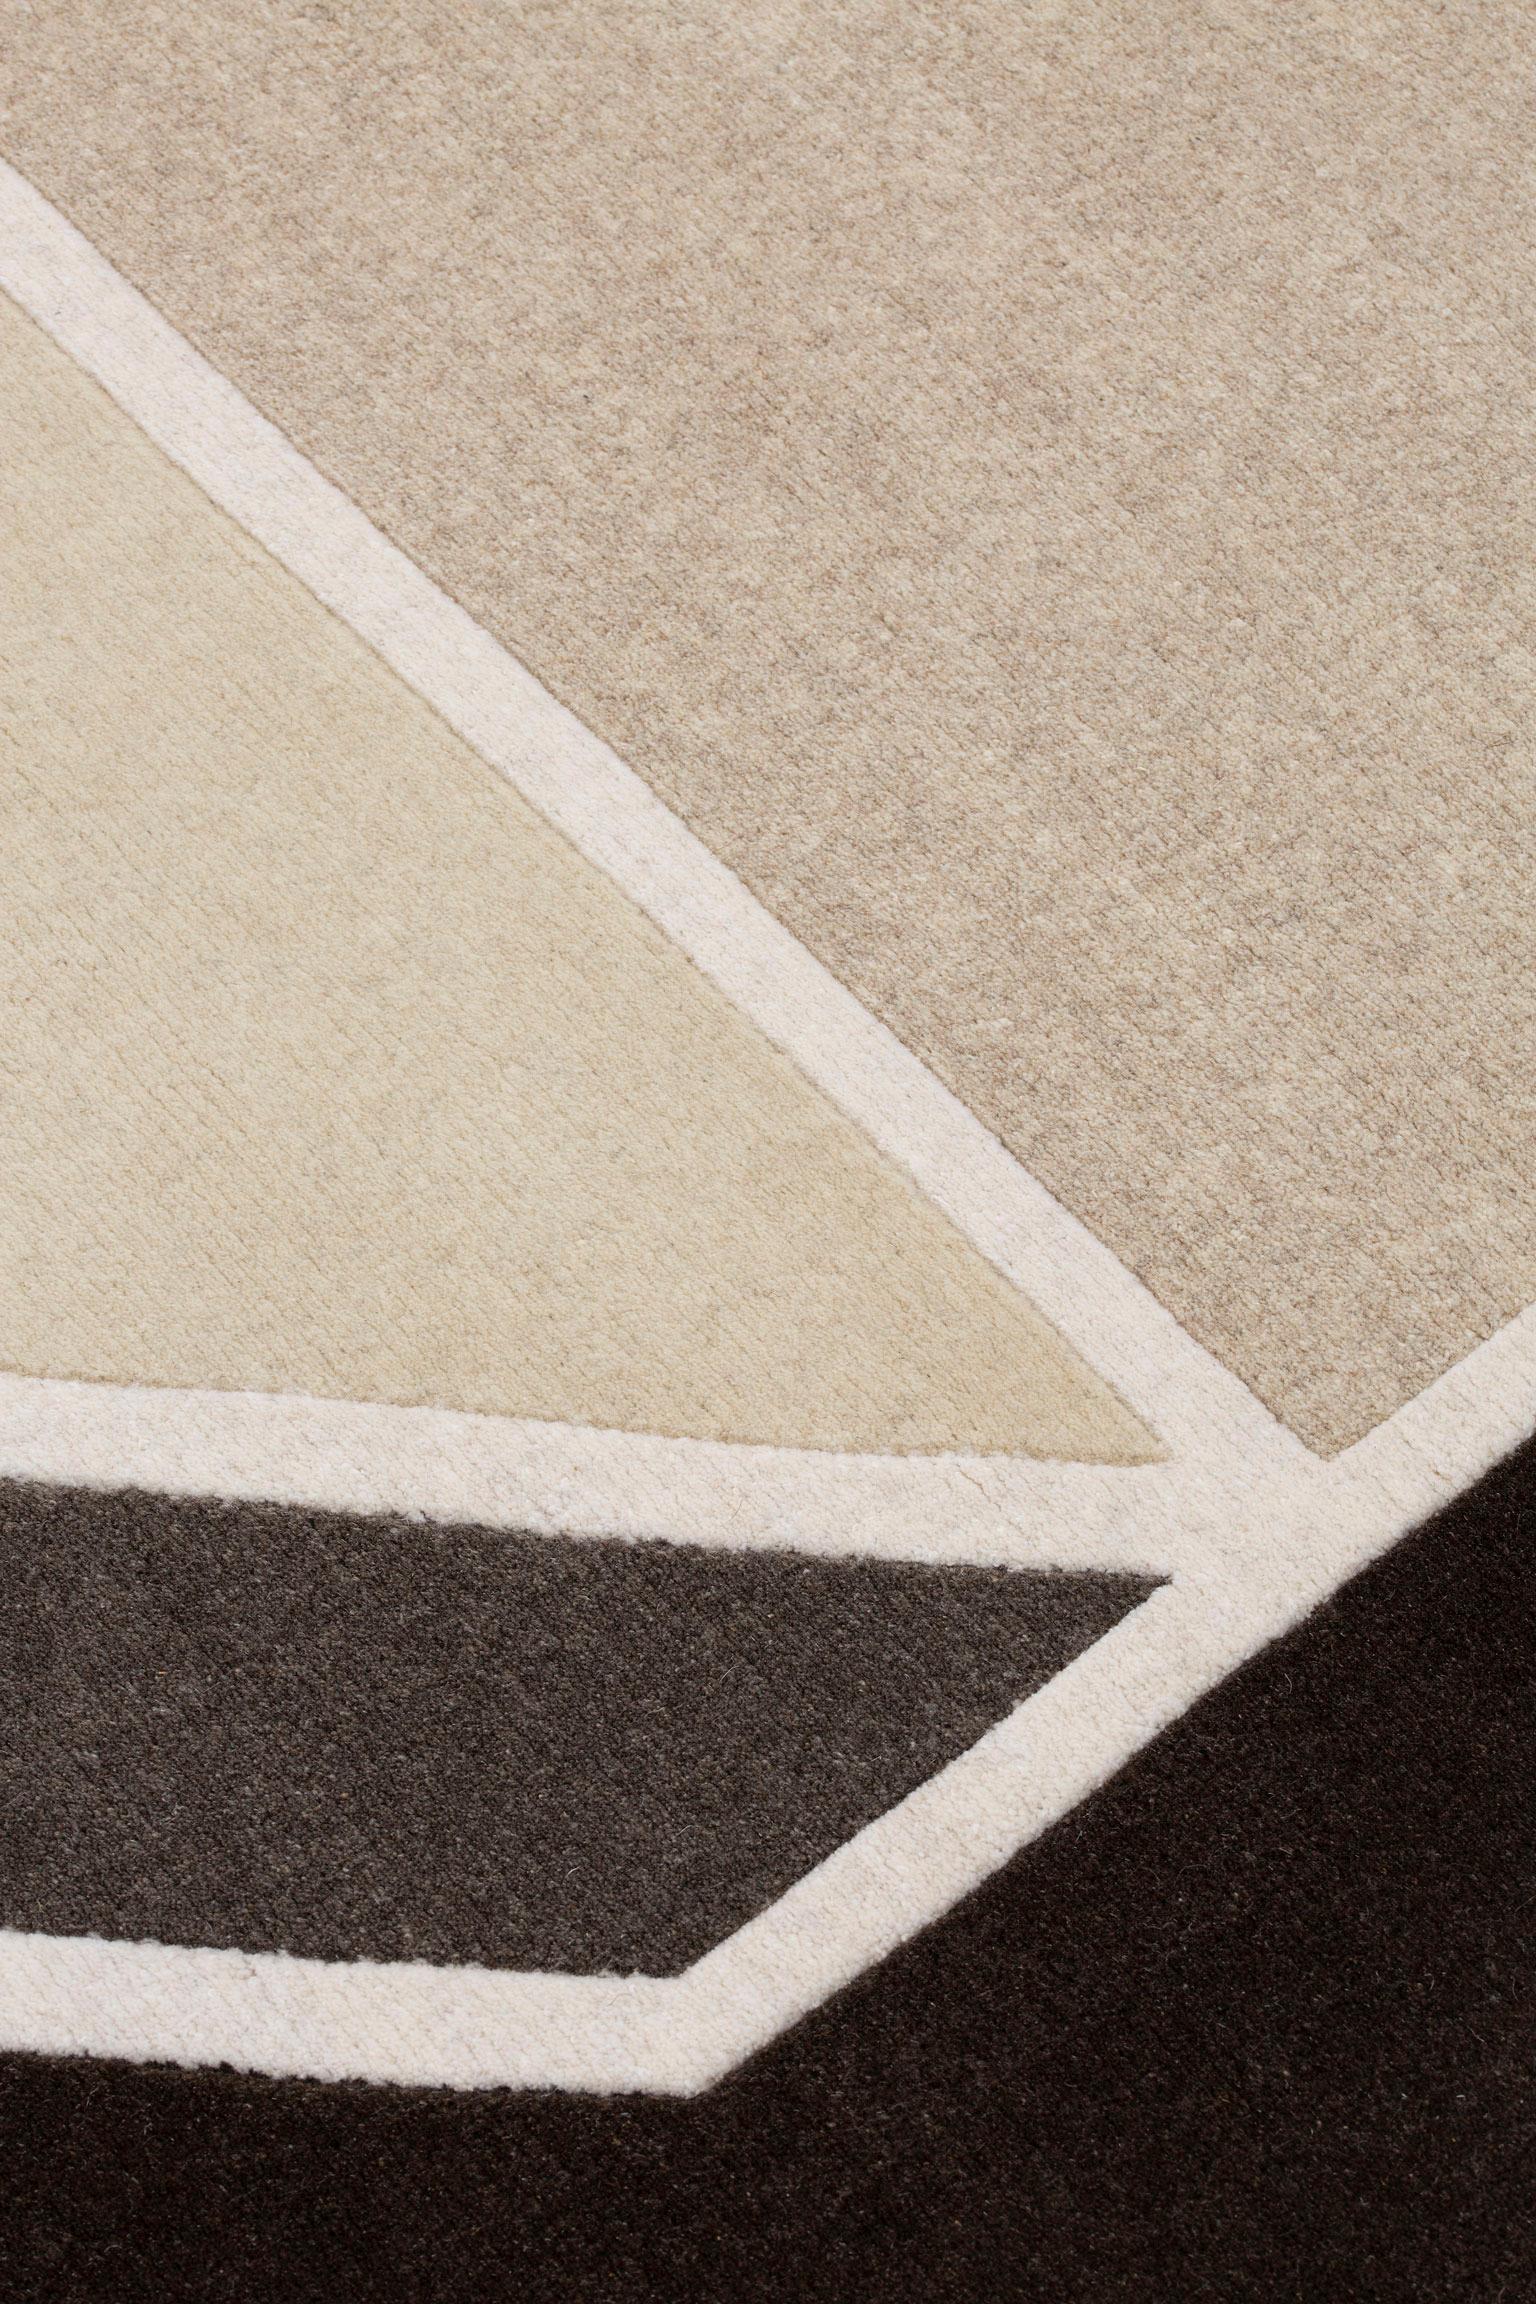 cc-Tapis icons are presented in an entirely undyed mood. 
Bringing a natural warmth to the avant-garde aesthetic of the brand, with each rug expressing its singularity through its natural color.